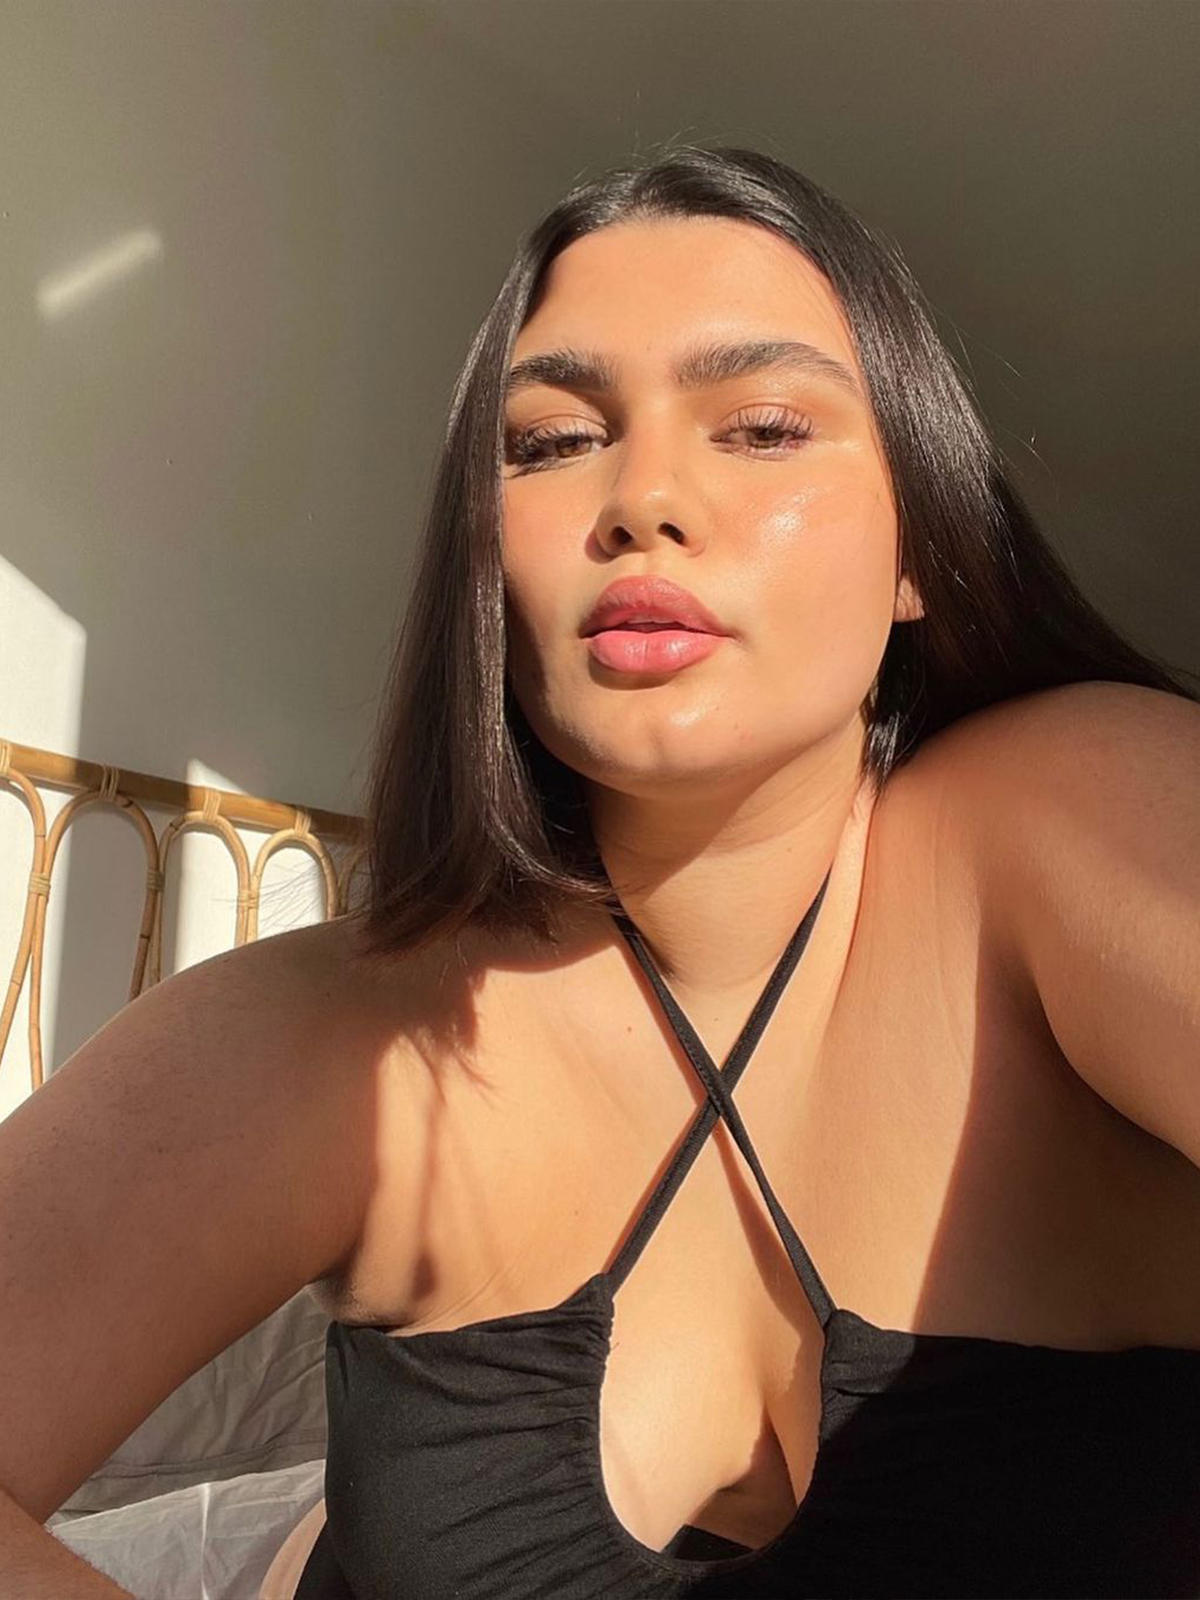 These Minimalist Makeup Products Are the Perfect Recipe for Hot Girl Summer